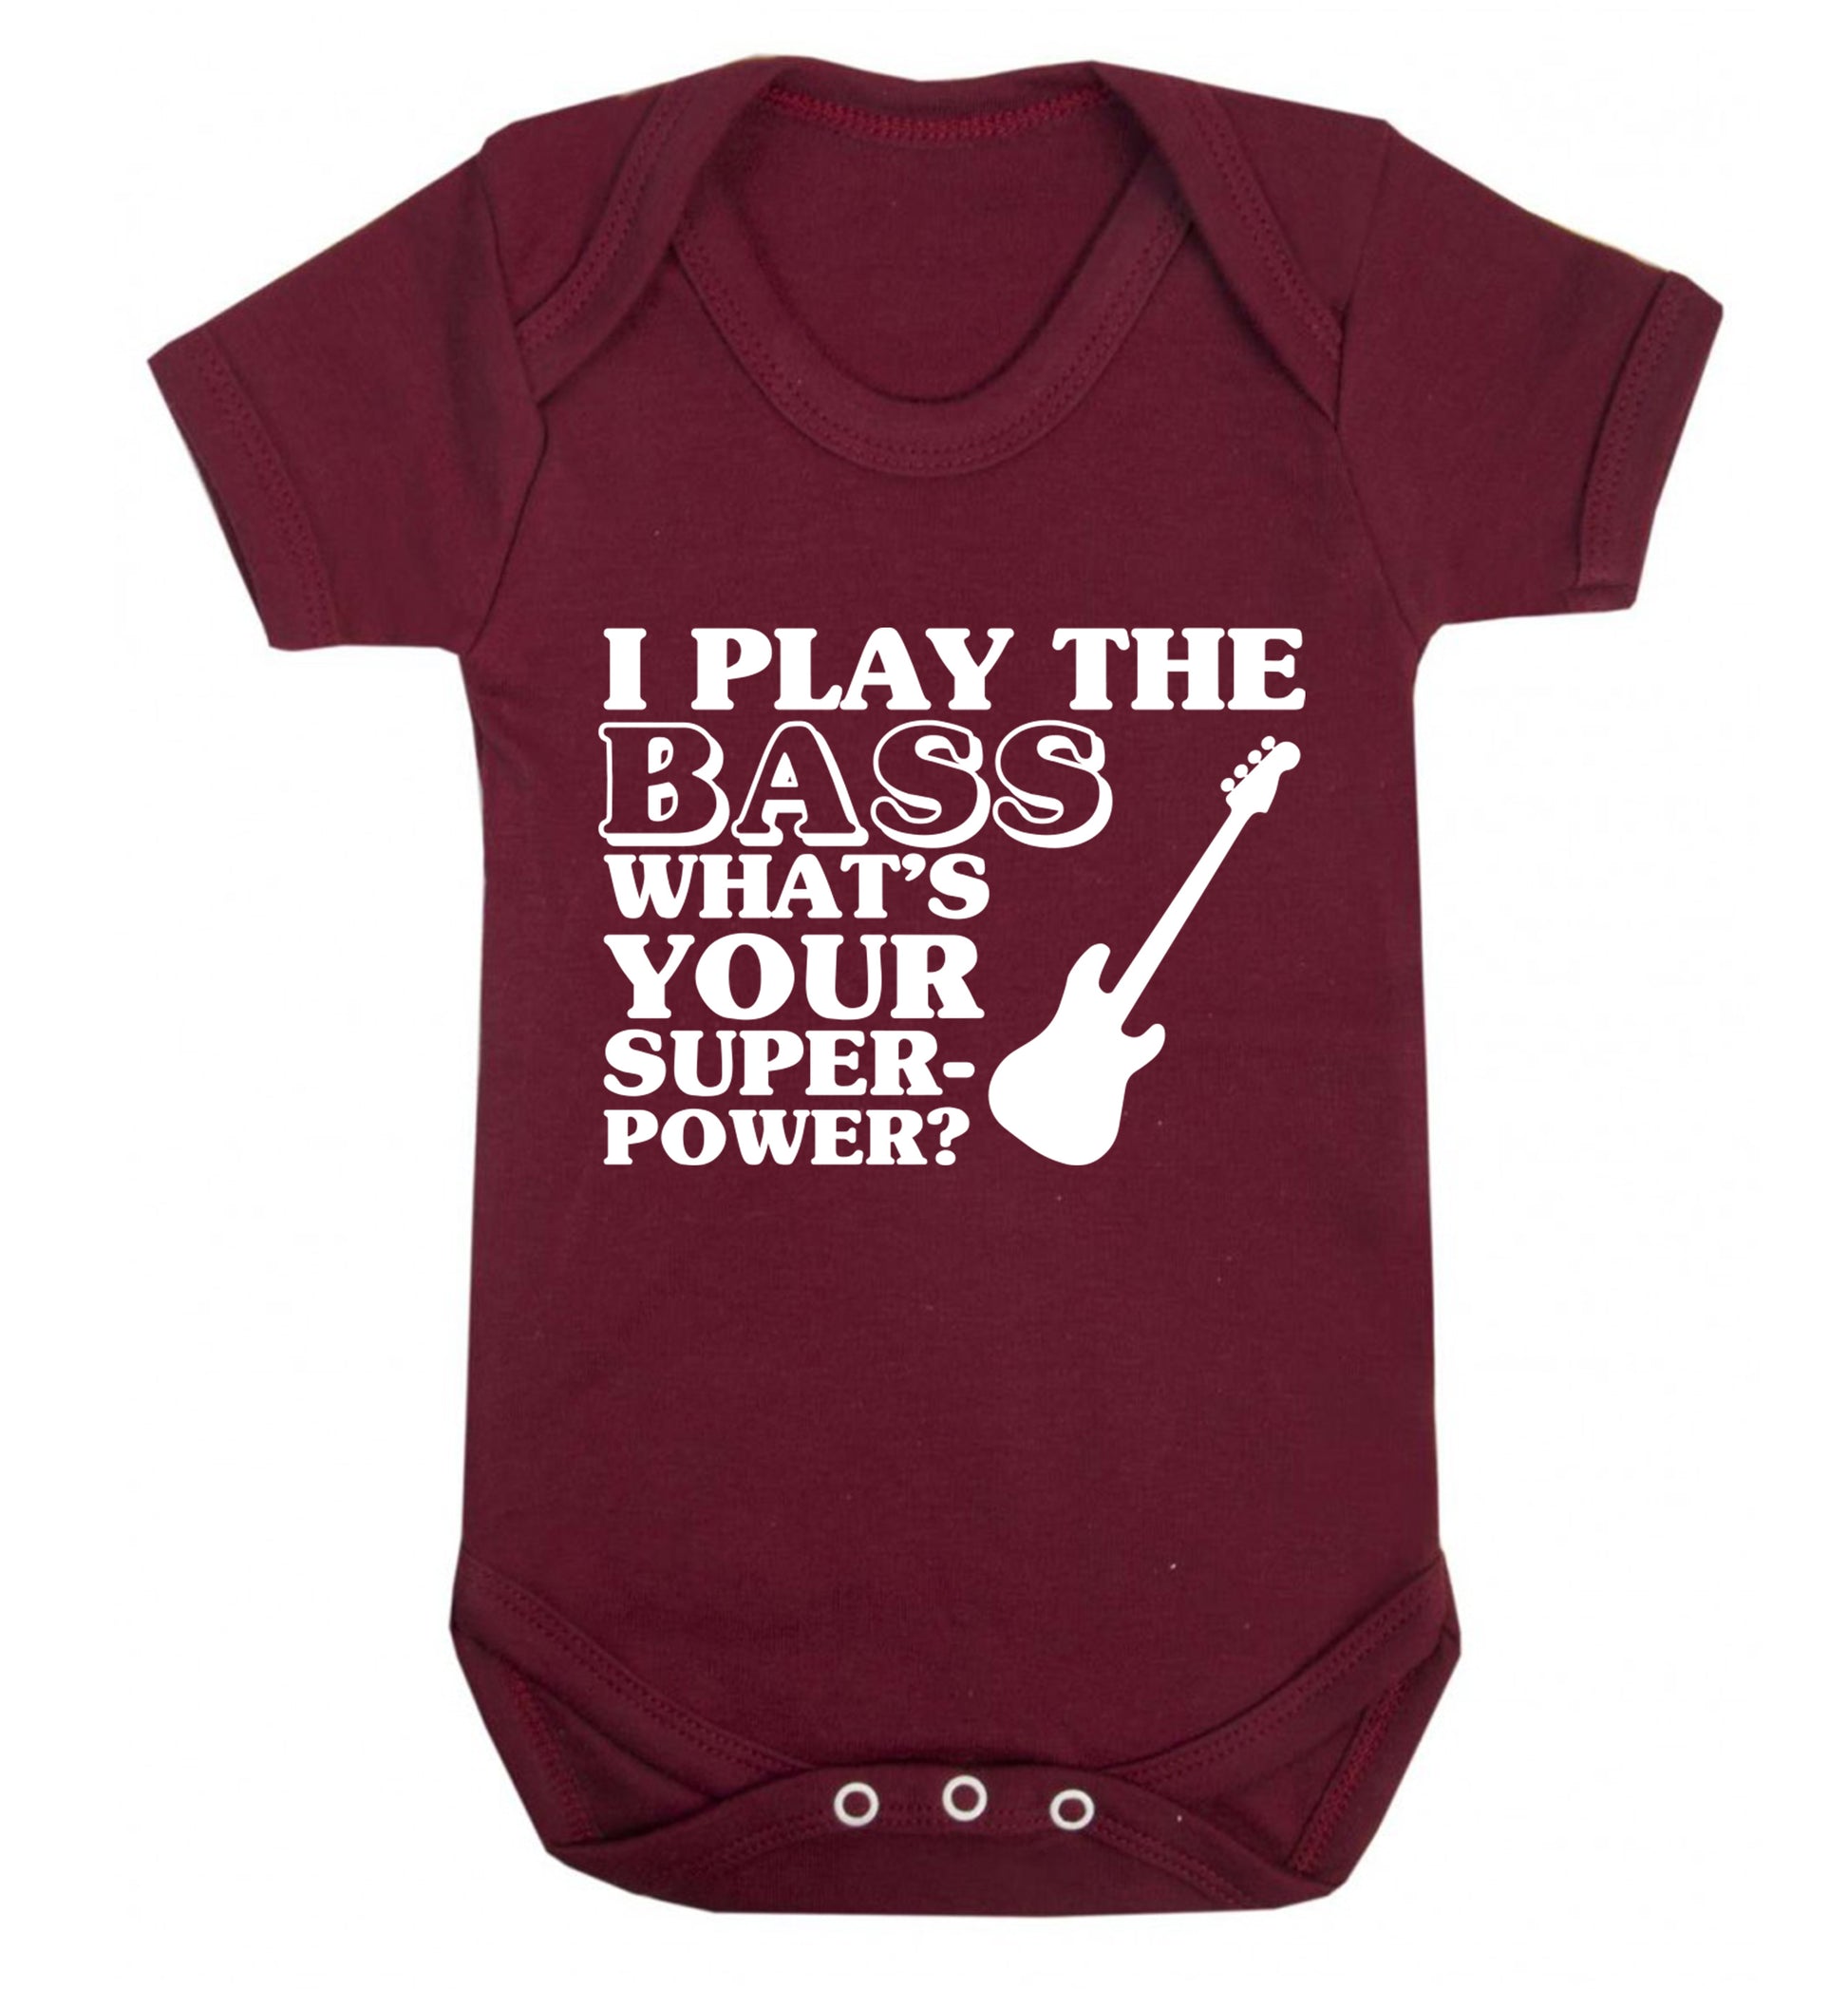 I play the bass what's your superpower? Baby Vest maroon 18-24 months